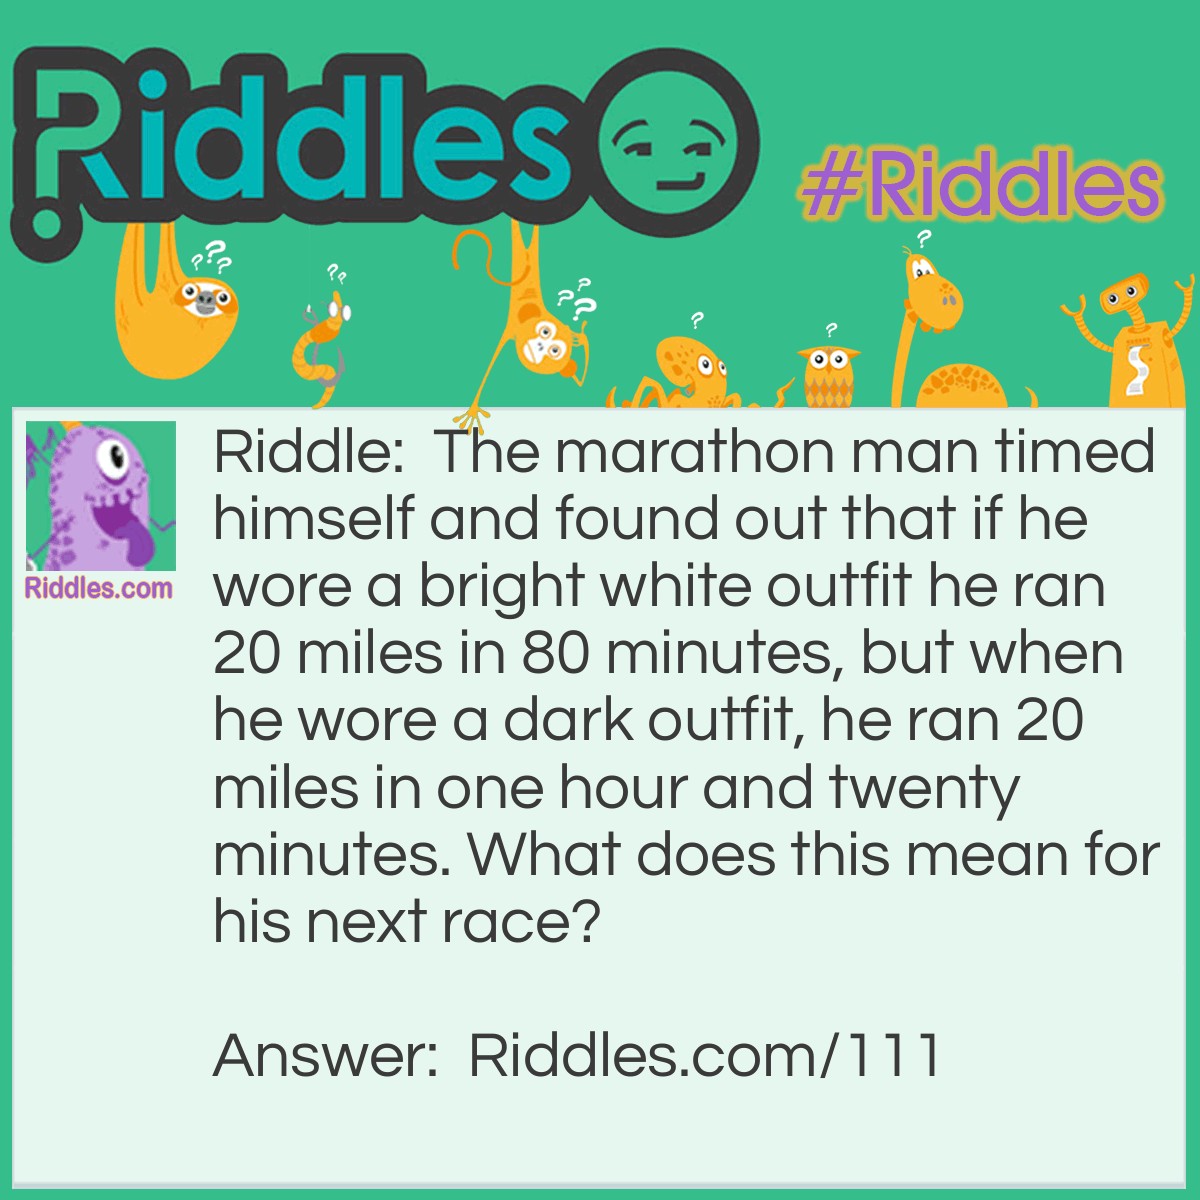 Riddle: The marathon man timed himself and found out that if he wore a bright white outfit he ran 20 miles in 80 minutes, but when he wore a dark outfit, he ran 20 miles in one hour and twenty minutes. What does this mean for his next race? Answer: Absolutely nothing, as 80 minutes equals an hour and twenty minutes.